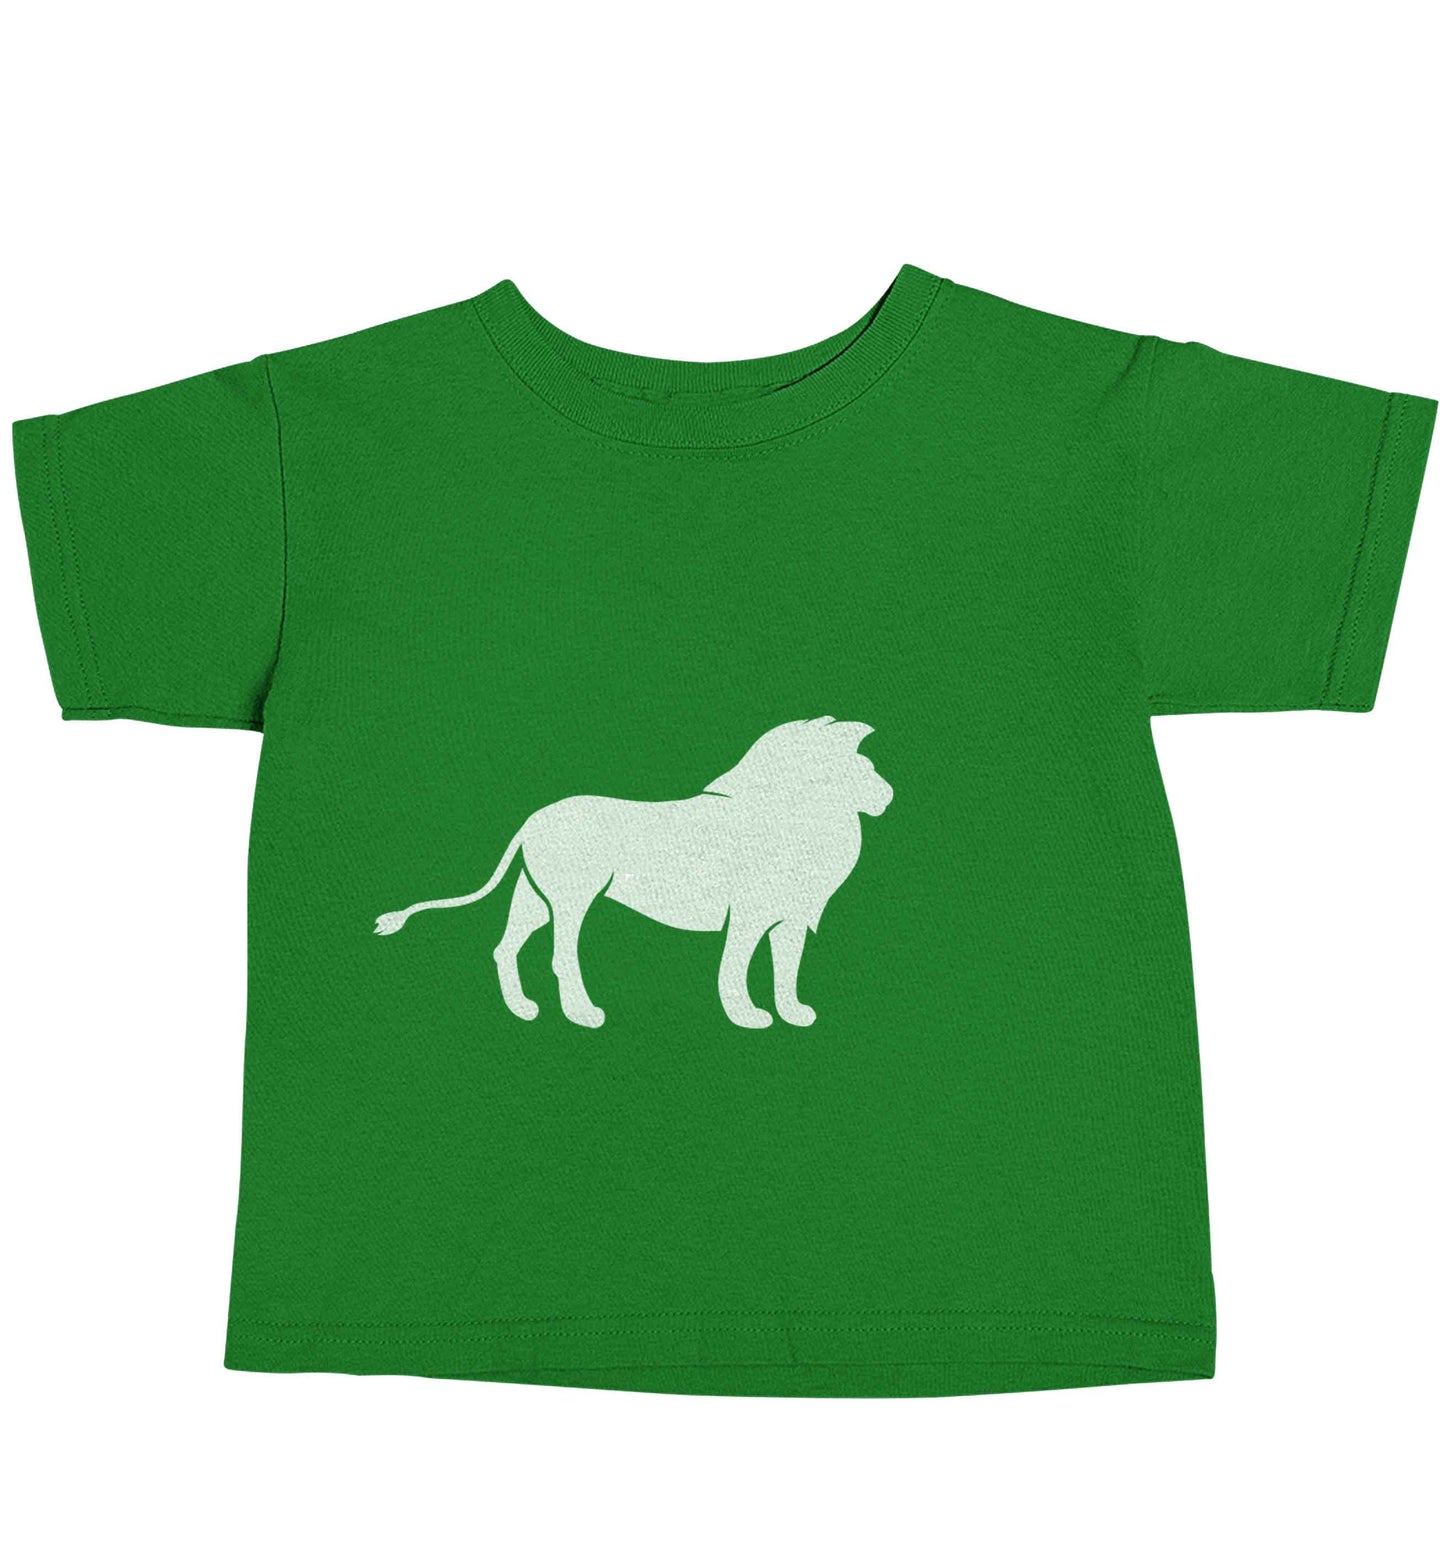 Gold lion green baby toddler Tshirt 2 Years